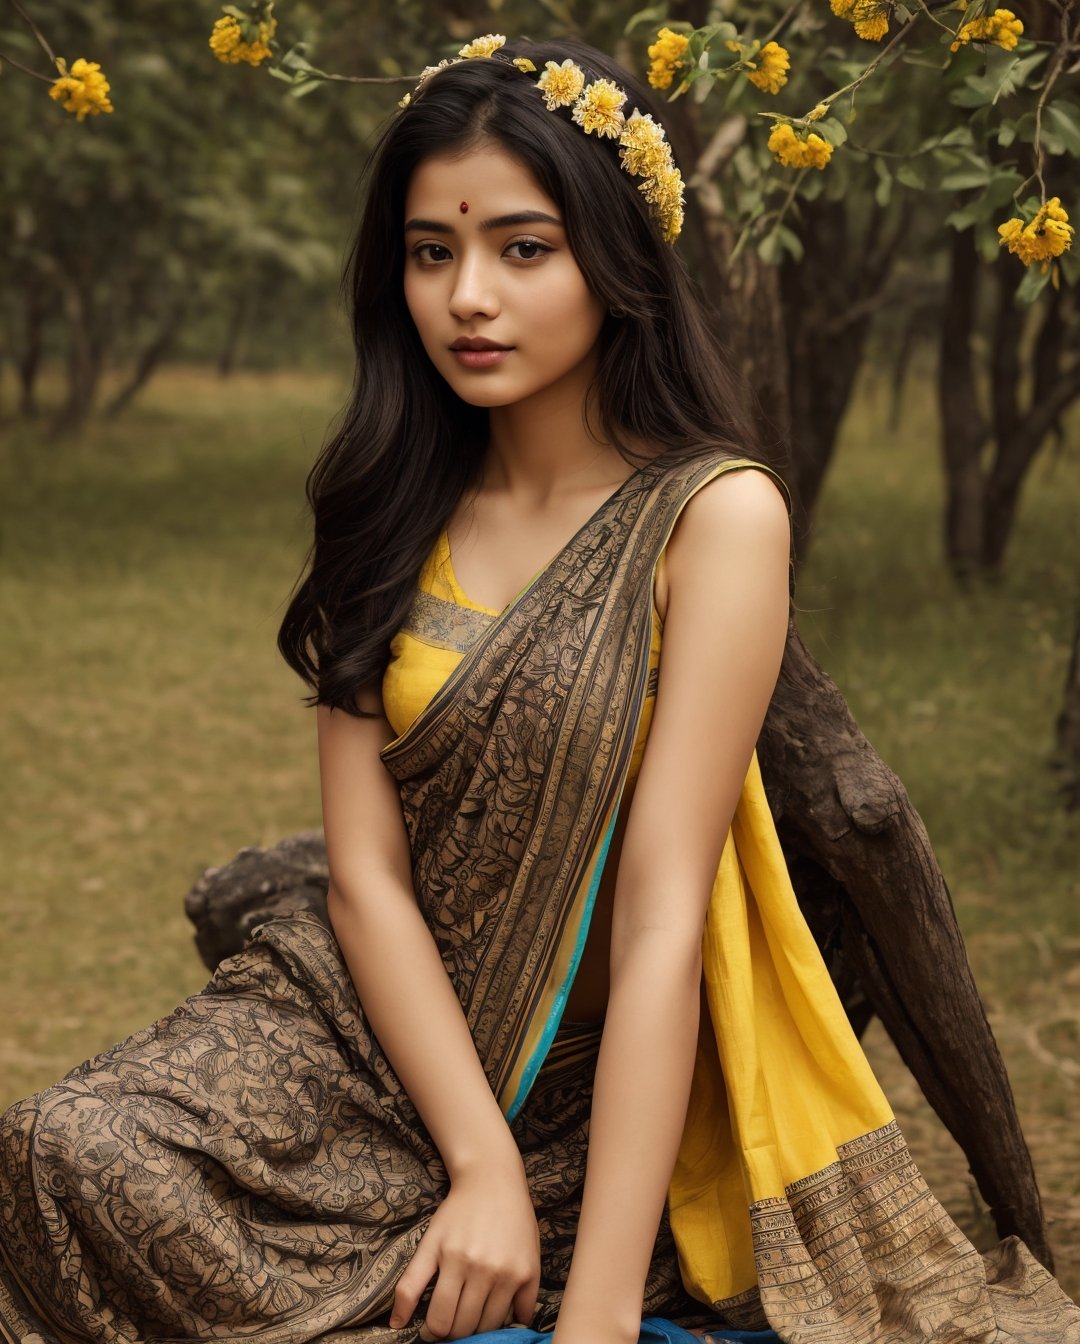  Generate hyper realistic image of young girl from the northeastern region of South Asia. She has a serene and gentle expression, with long, dark, flowing hair adorned with traditional floral accessories. Her skin is a warm, golden brown tone, and her eyes are large and expressive, reflecting a deep cultural heritage. She is dressed in traditional saree, such as a vibrant sari or a salwar kameez, decorated with intricate patterns and bright colors. The background features lush yellow landscapes, possibly with hints of traditional northeastern architecture or natural scenery like flowers or forest. The overall mood of the image is one of elegance, grace, and cultural pride., ,Enhance,1 girl